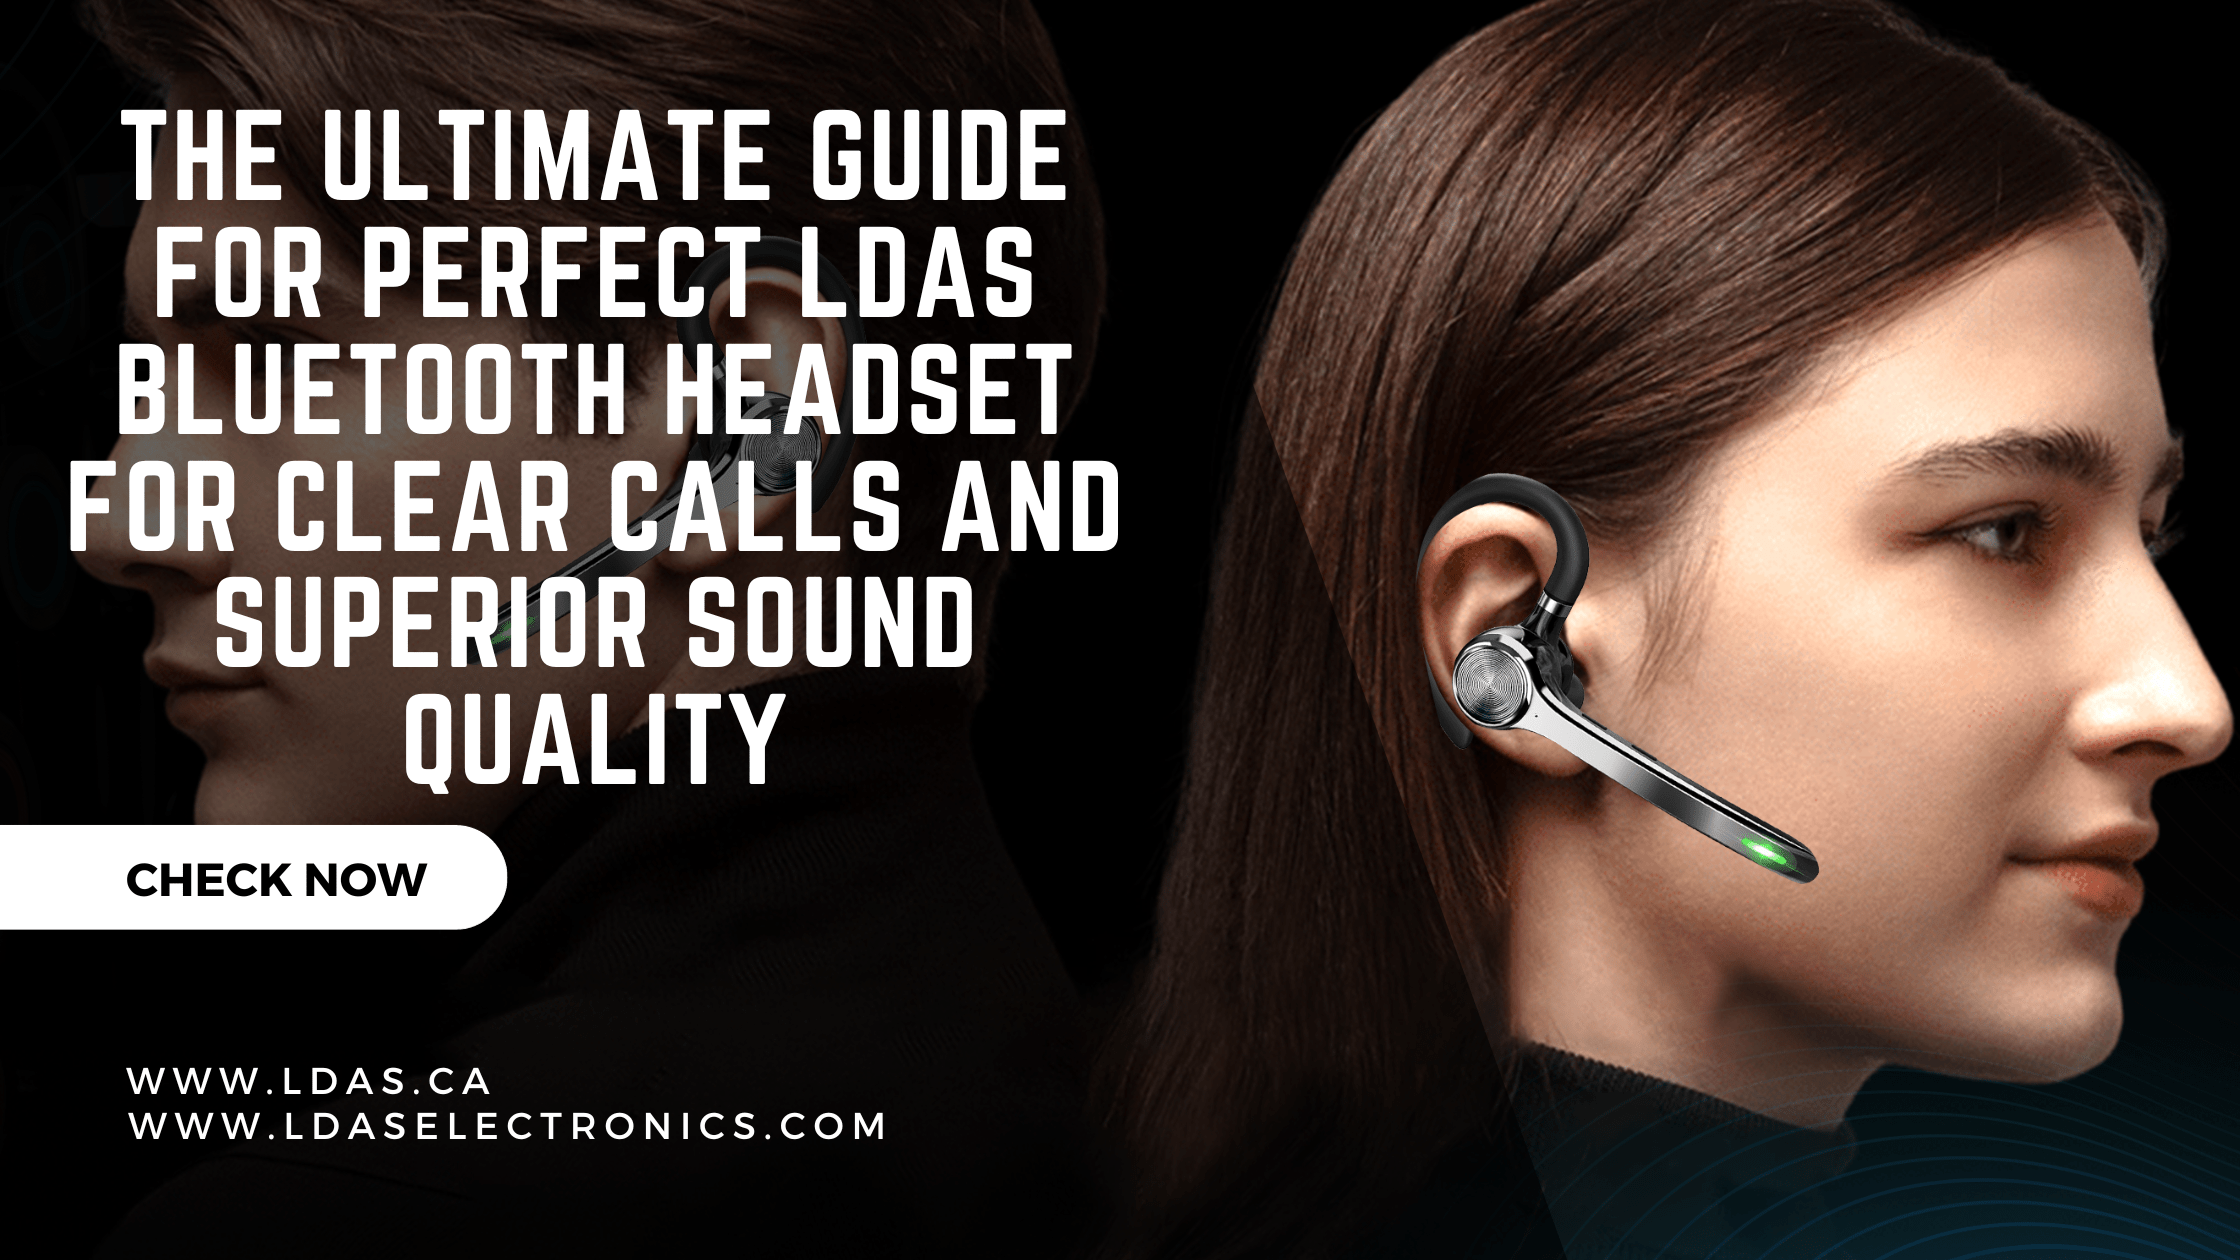 The Ultimate Guide for Perfect LDAS Bluetooth Headset for Clear Calls and Superior Sound Quality - LDAS ELECTRONICS